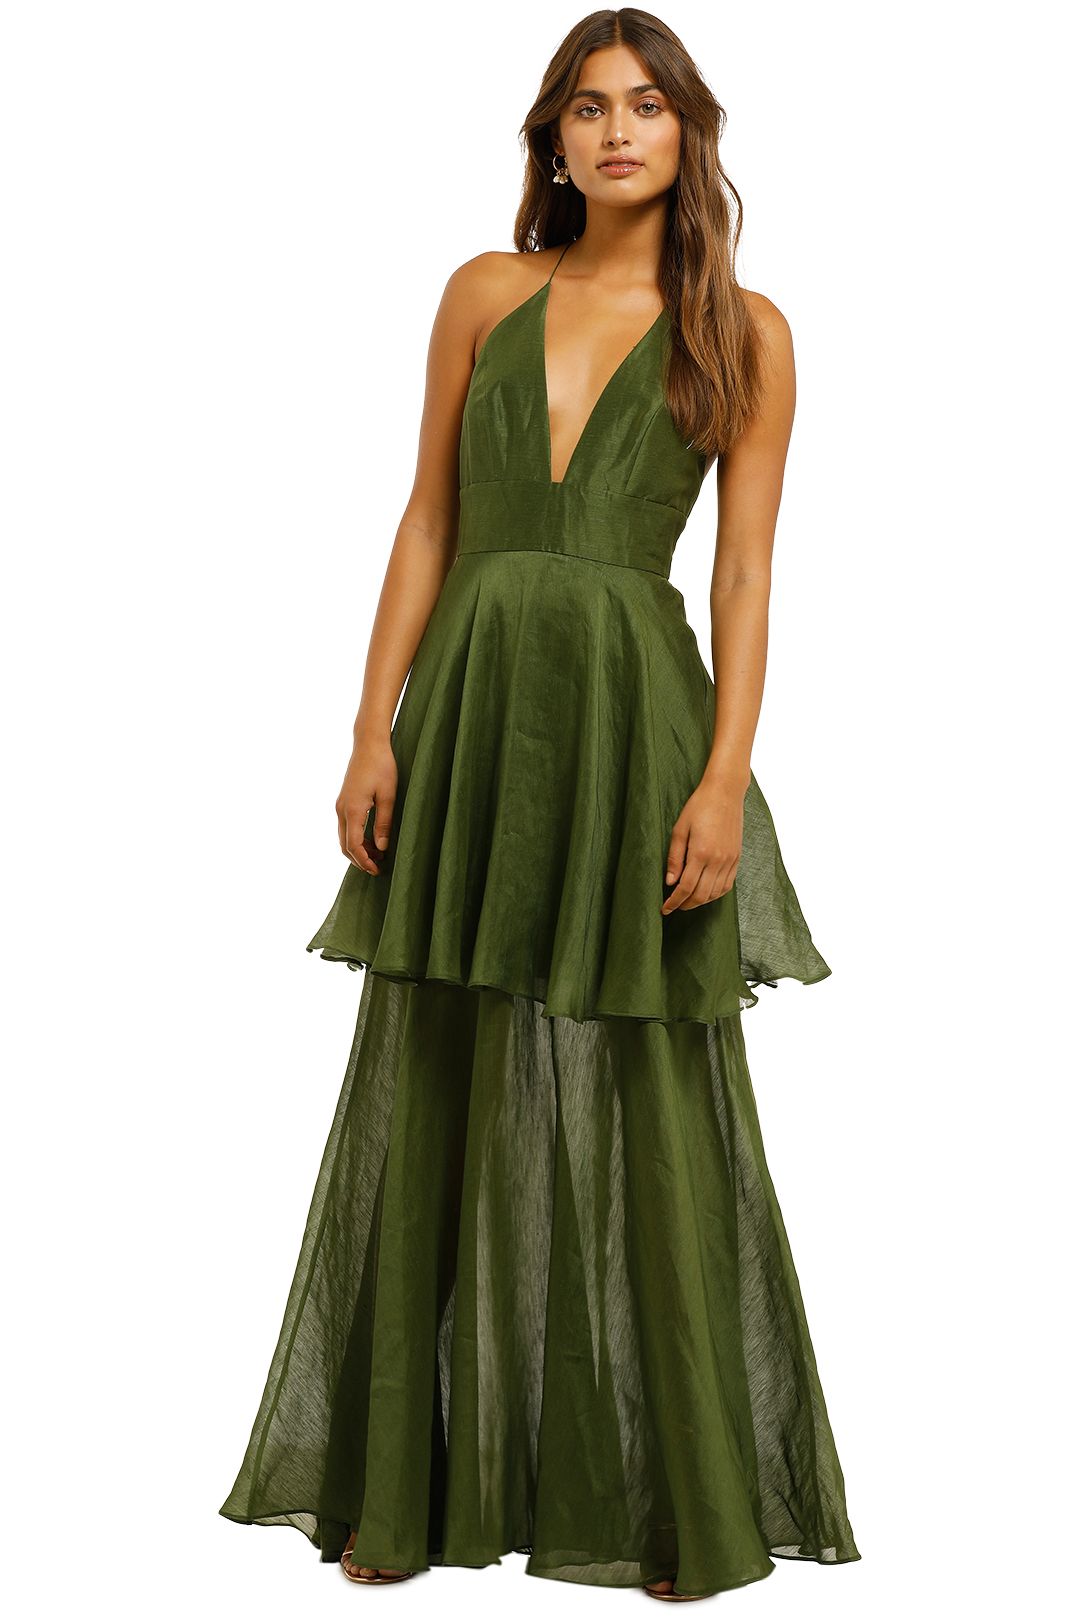 Ginger & Smart - Eminence Gown - Pine